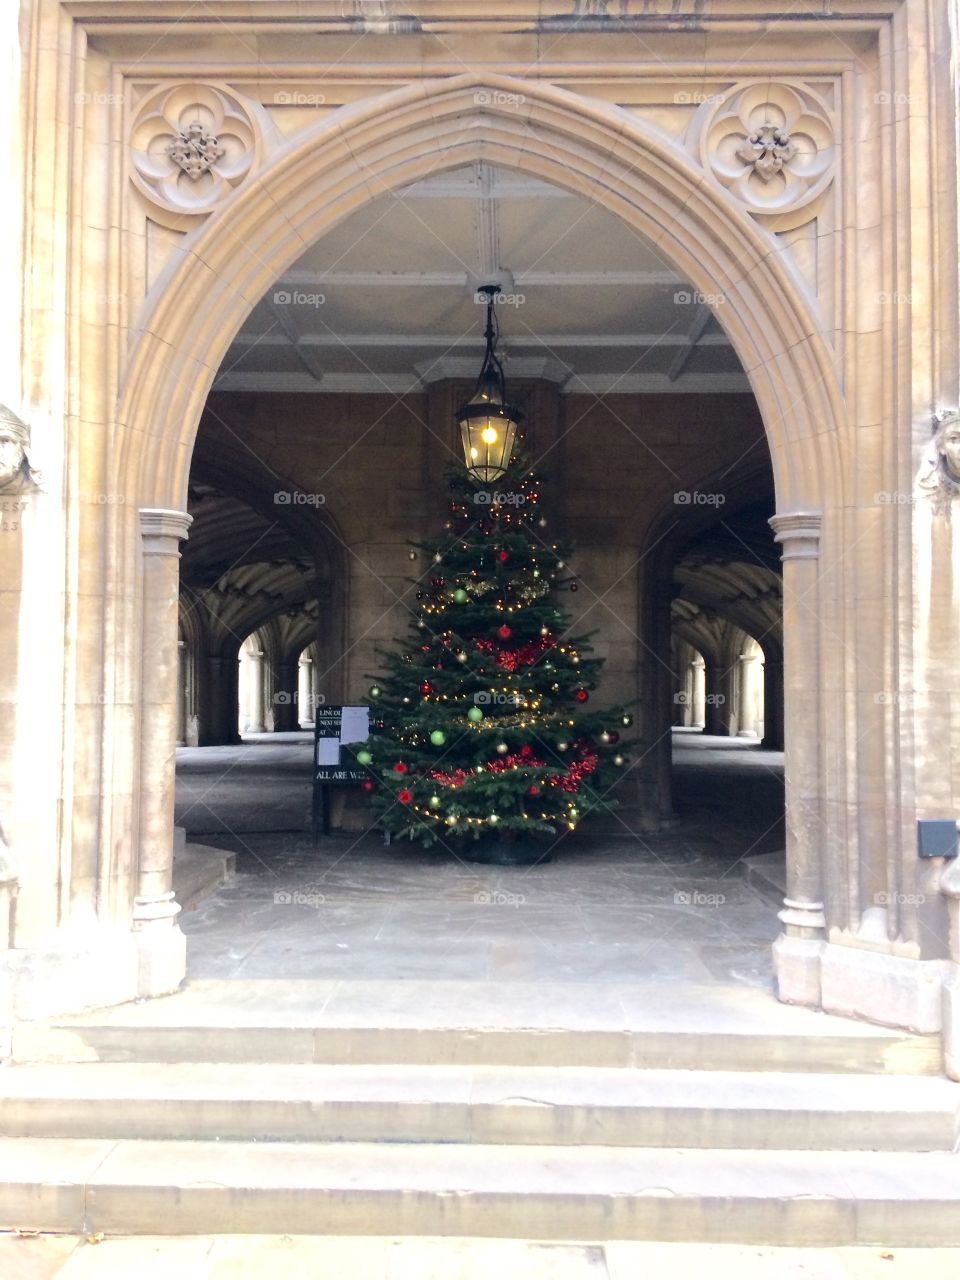 Decorated Christmas Tree in ornate arch in undercroft of church, Lincoln’s Inn, London